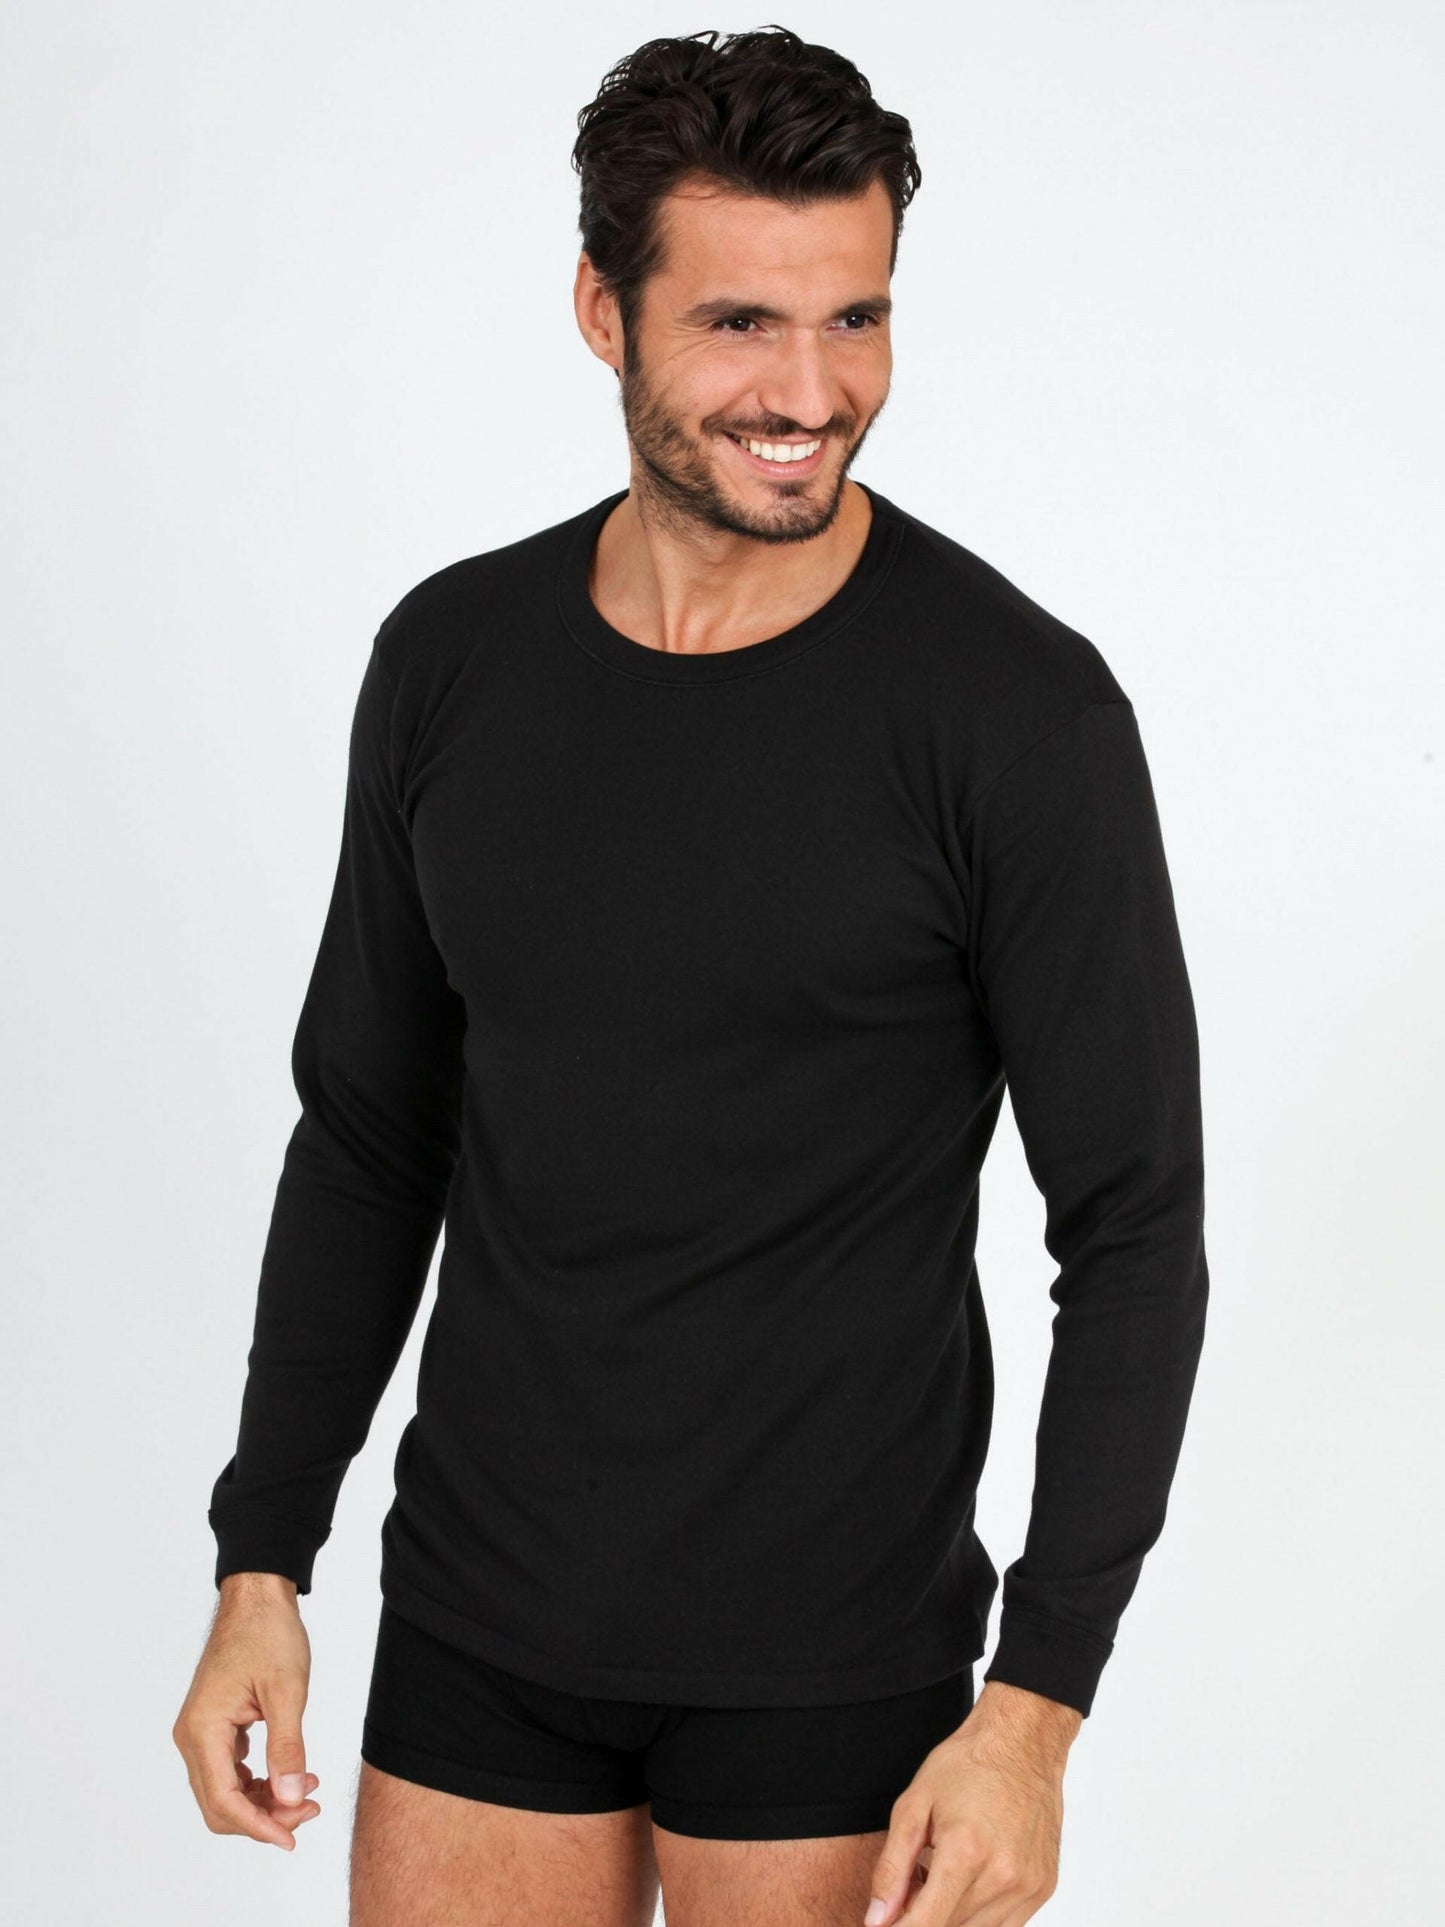 Men's T-shirt in FLEECE COTTON long sleeve - Made in Italy - 486